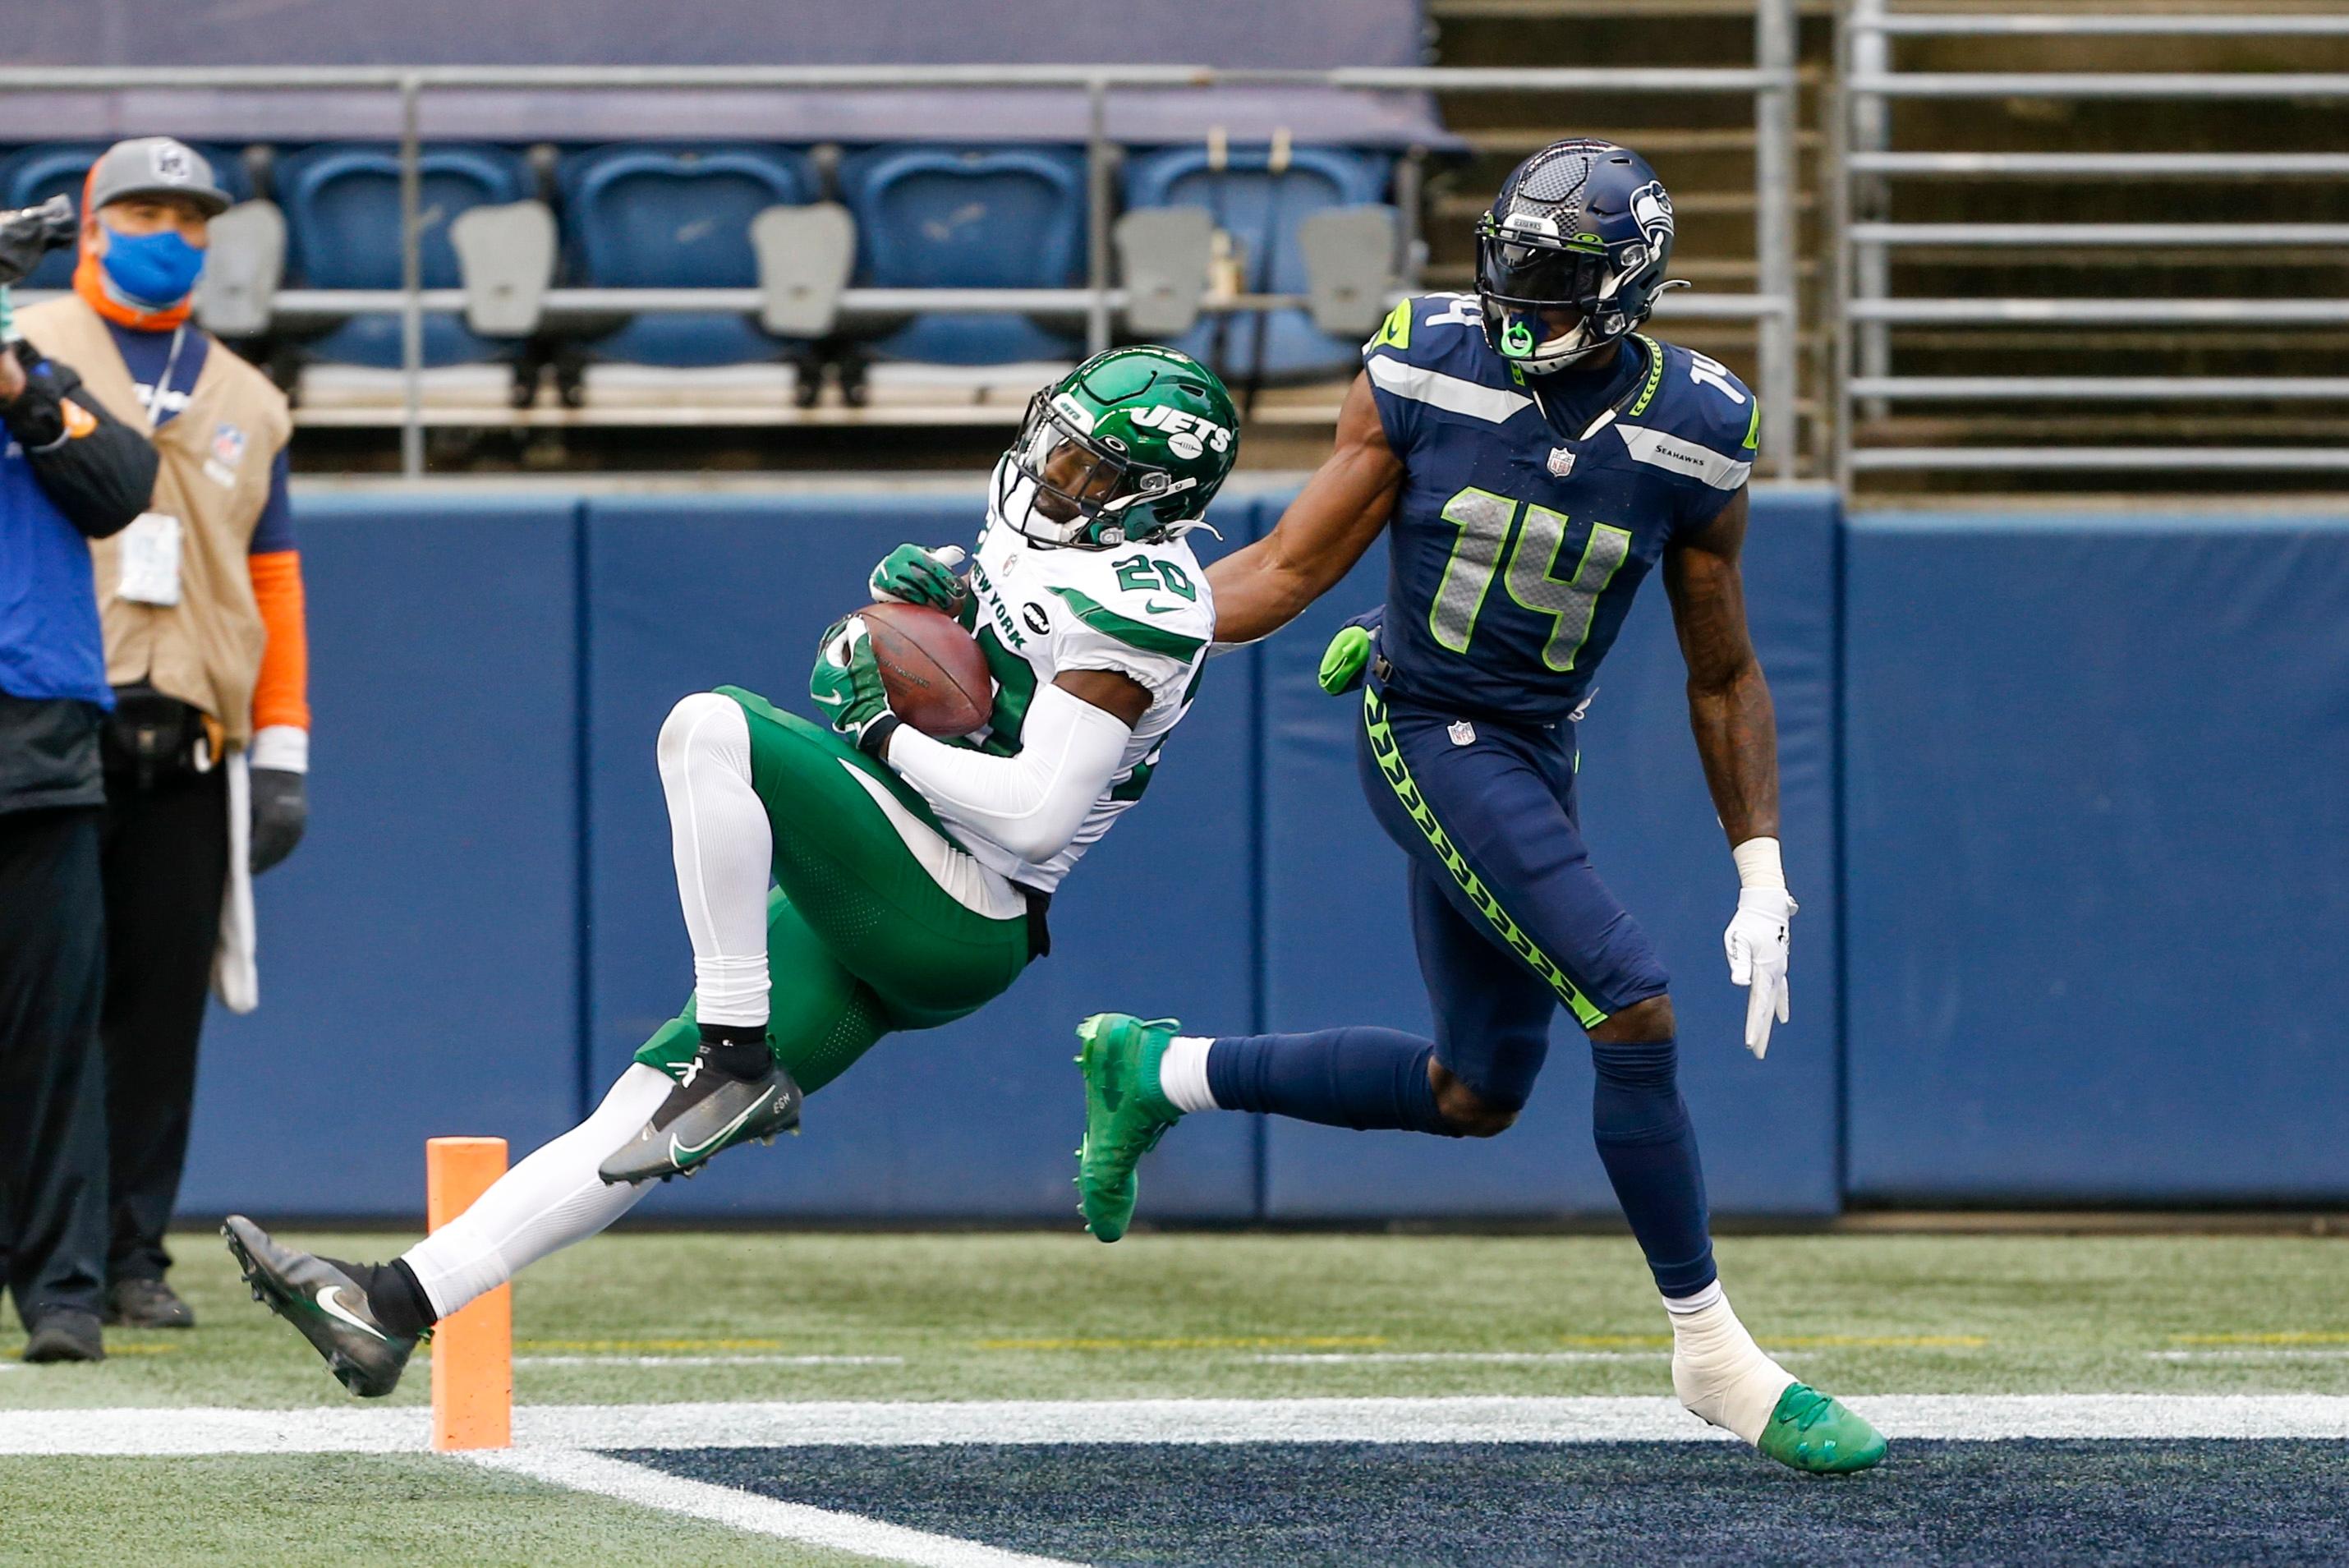 Dec 13, 2020; Seattle, Washington, USA; New York Jets free safety Marcus Maye (20) intercepts a pass intended for Seattle Seahawks wide receiver DK Metcalf (14) during the first quarter at Lumen Field. Mandatory Credit: Joe Nicholson-USA TODAY Sports / © Joe Nicholson-USA TODAY Sports